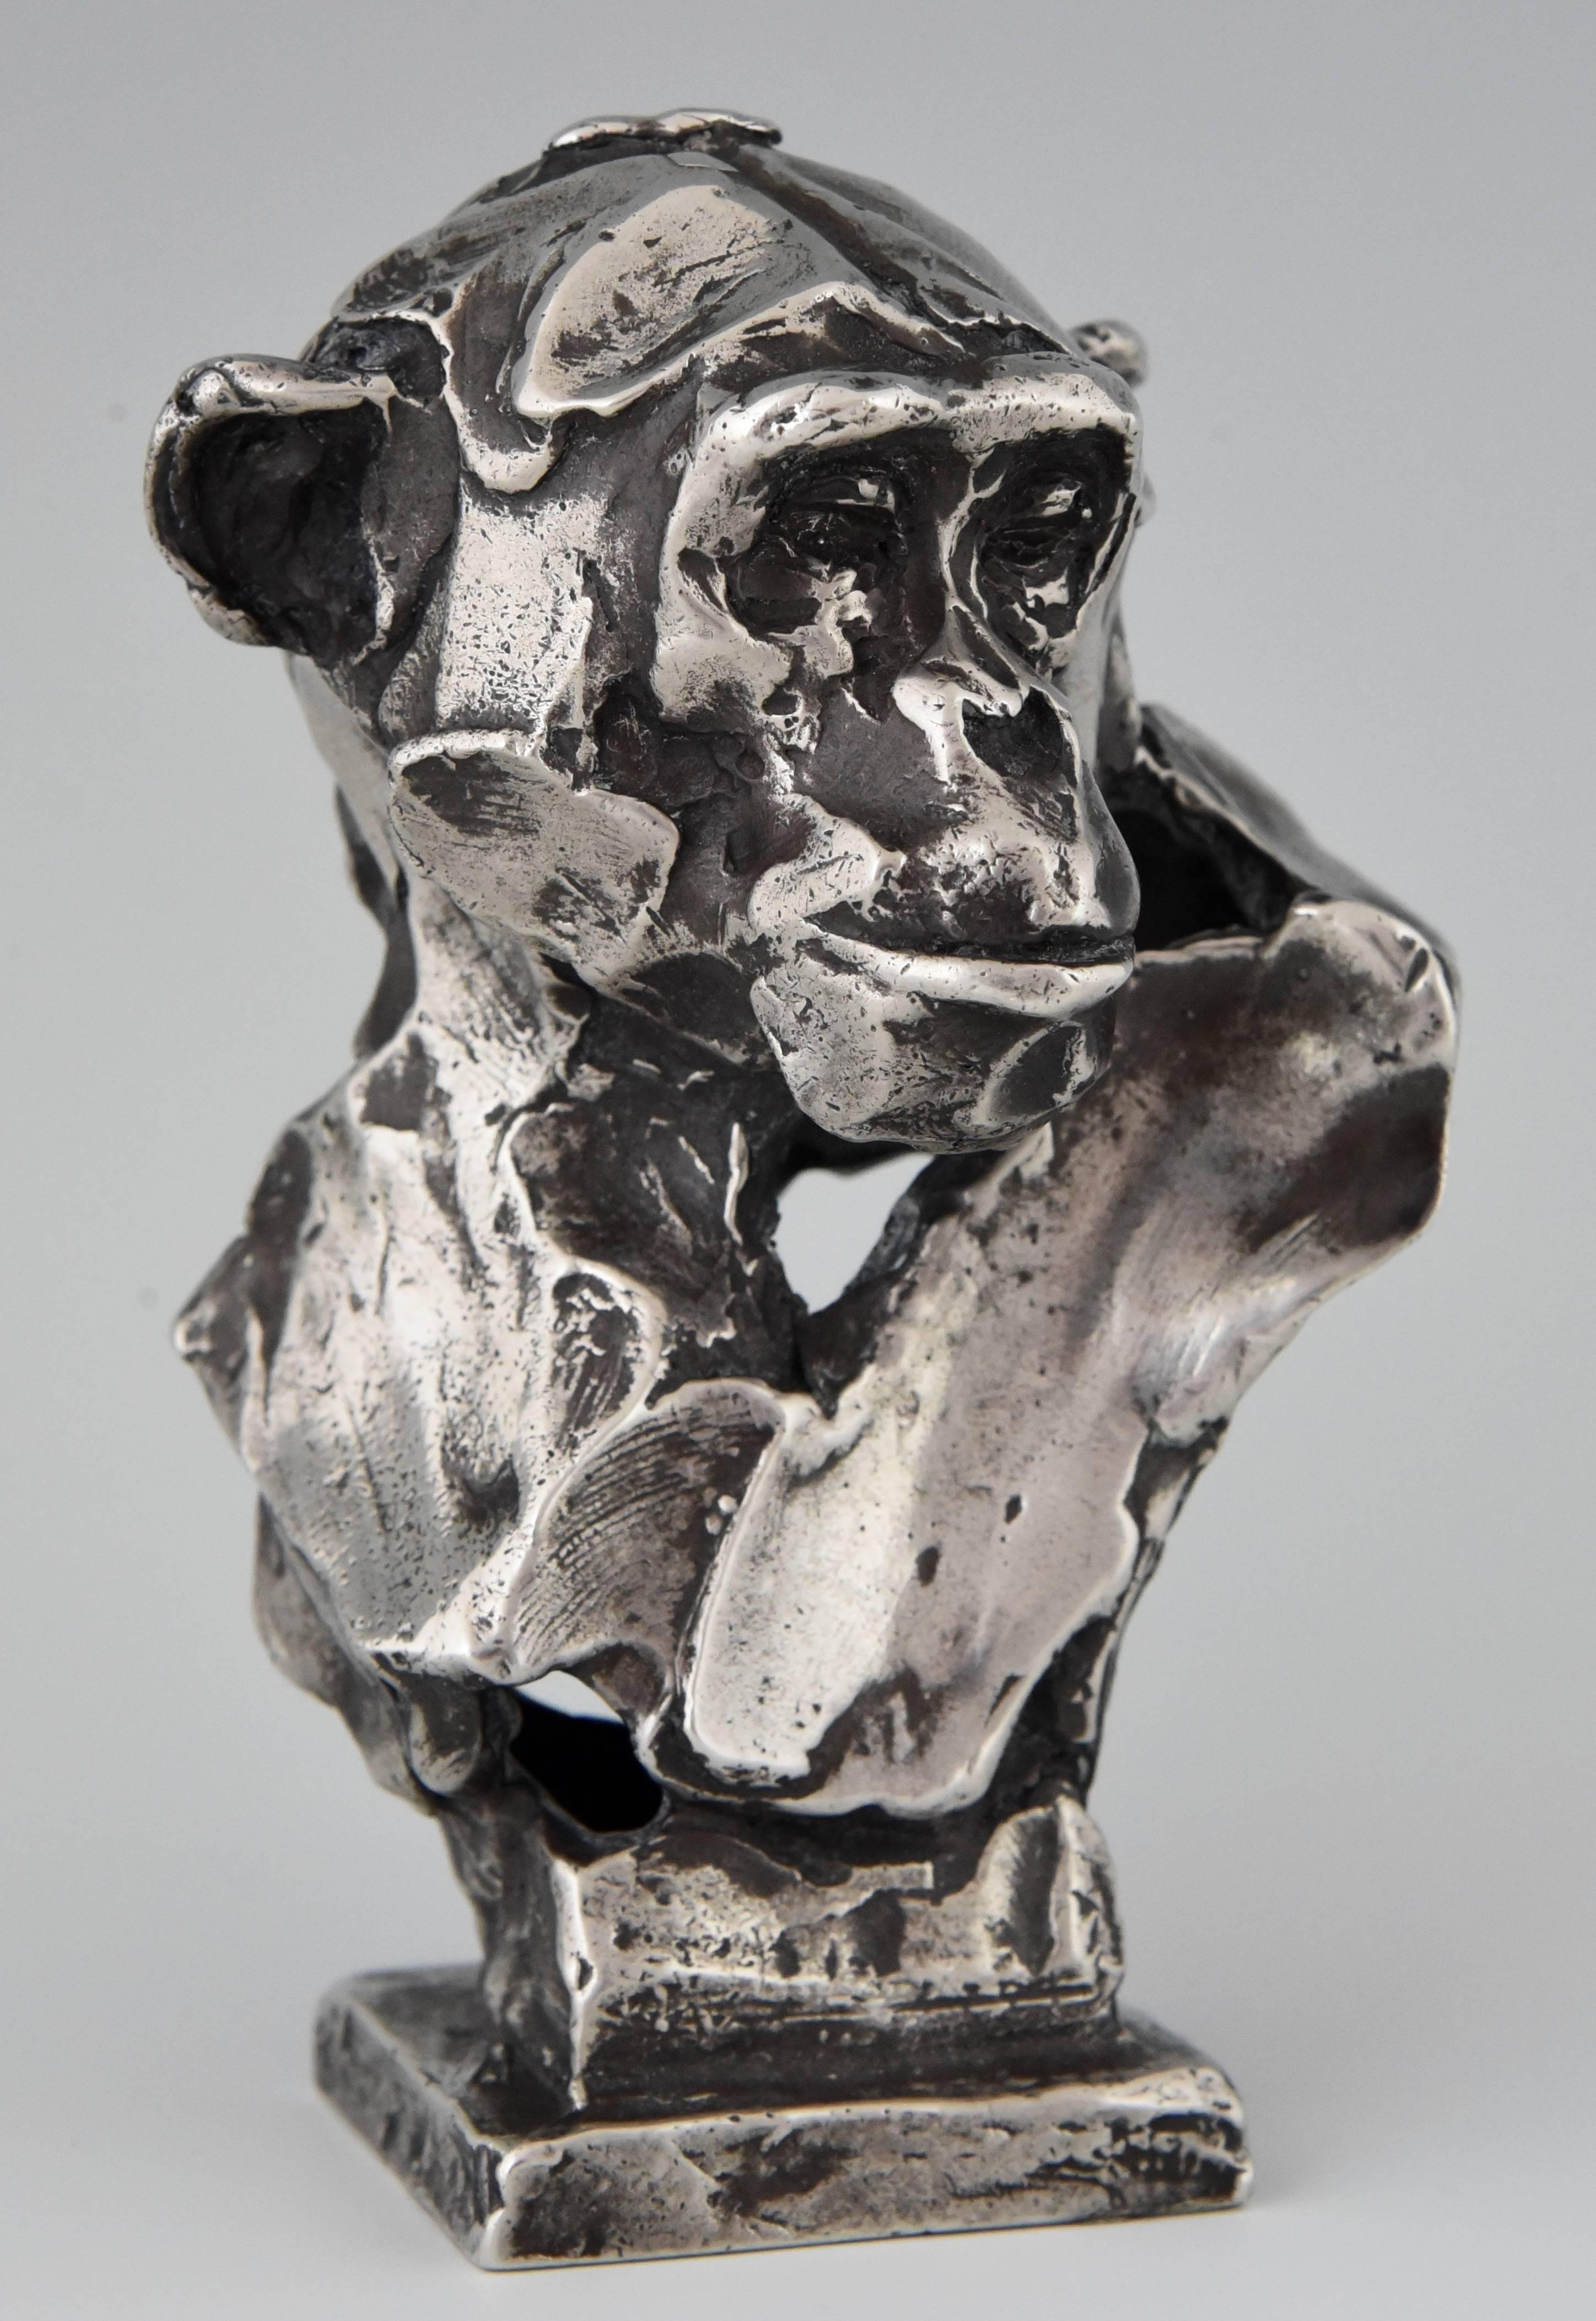 Beautiful sterling silver sculpture of a chimpanzee monkey by Erwin Peeters, Belgium, 2004.
Signed, Numbered EA I/V, foudry seal Art Casting.
Limited edition of five. One immediately available. 
Polished and patinated sterling silver.
 